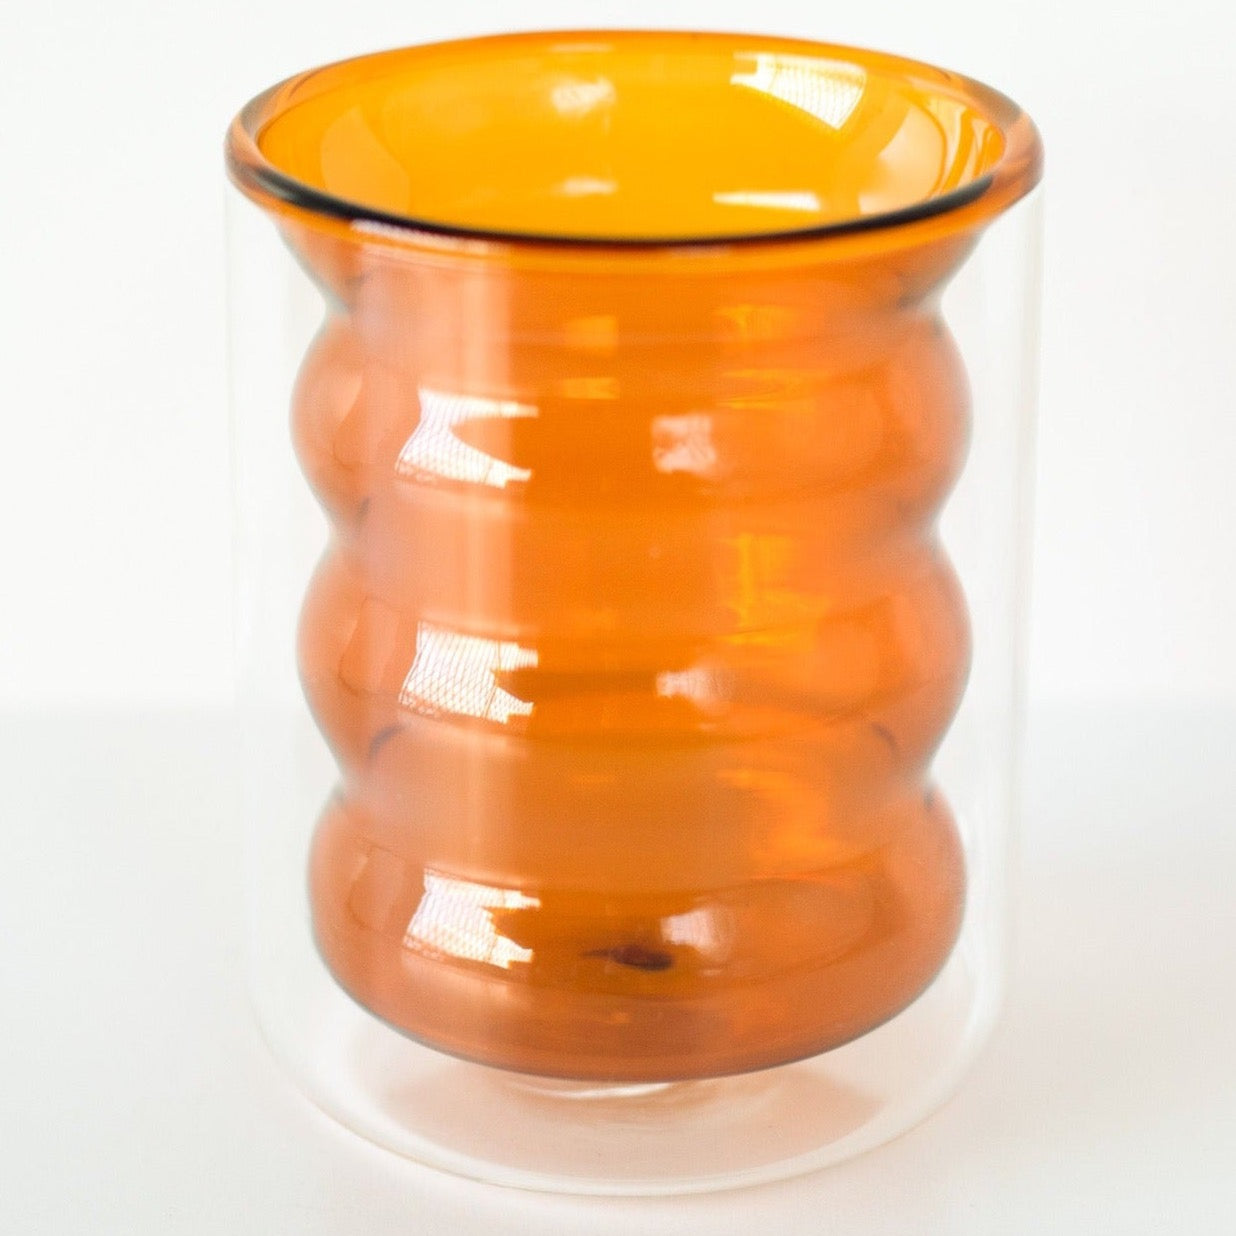 A double-walled amber orange rippled glass standing upright shot against a white background.